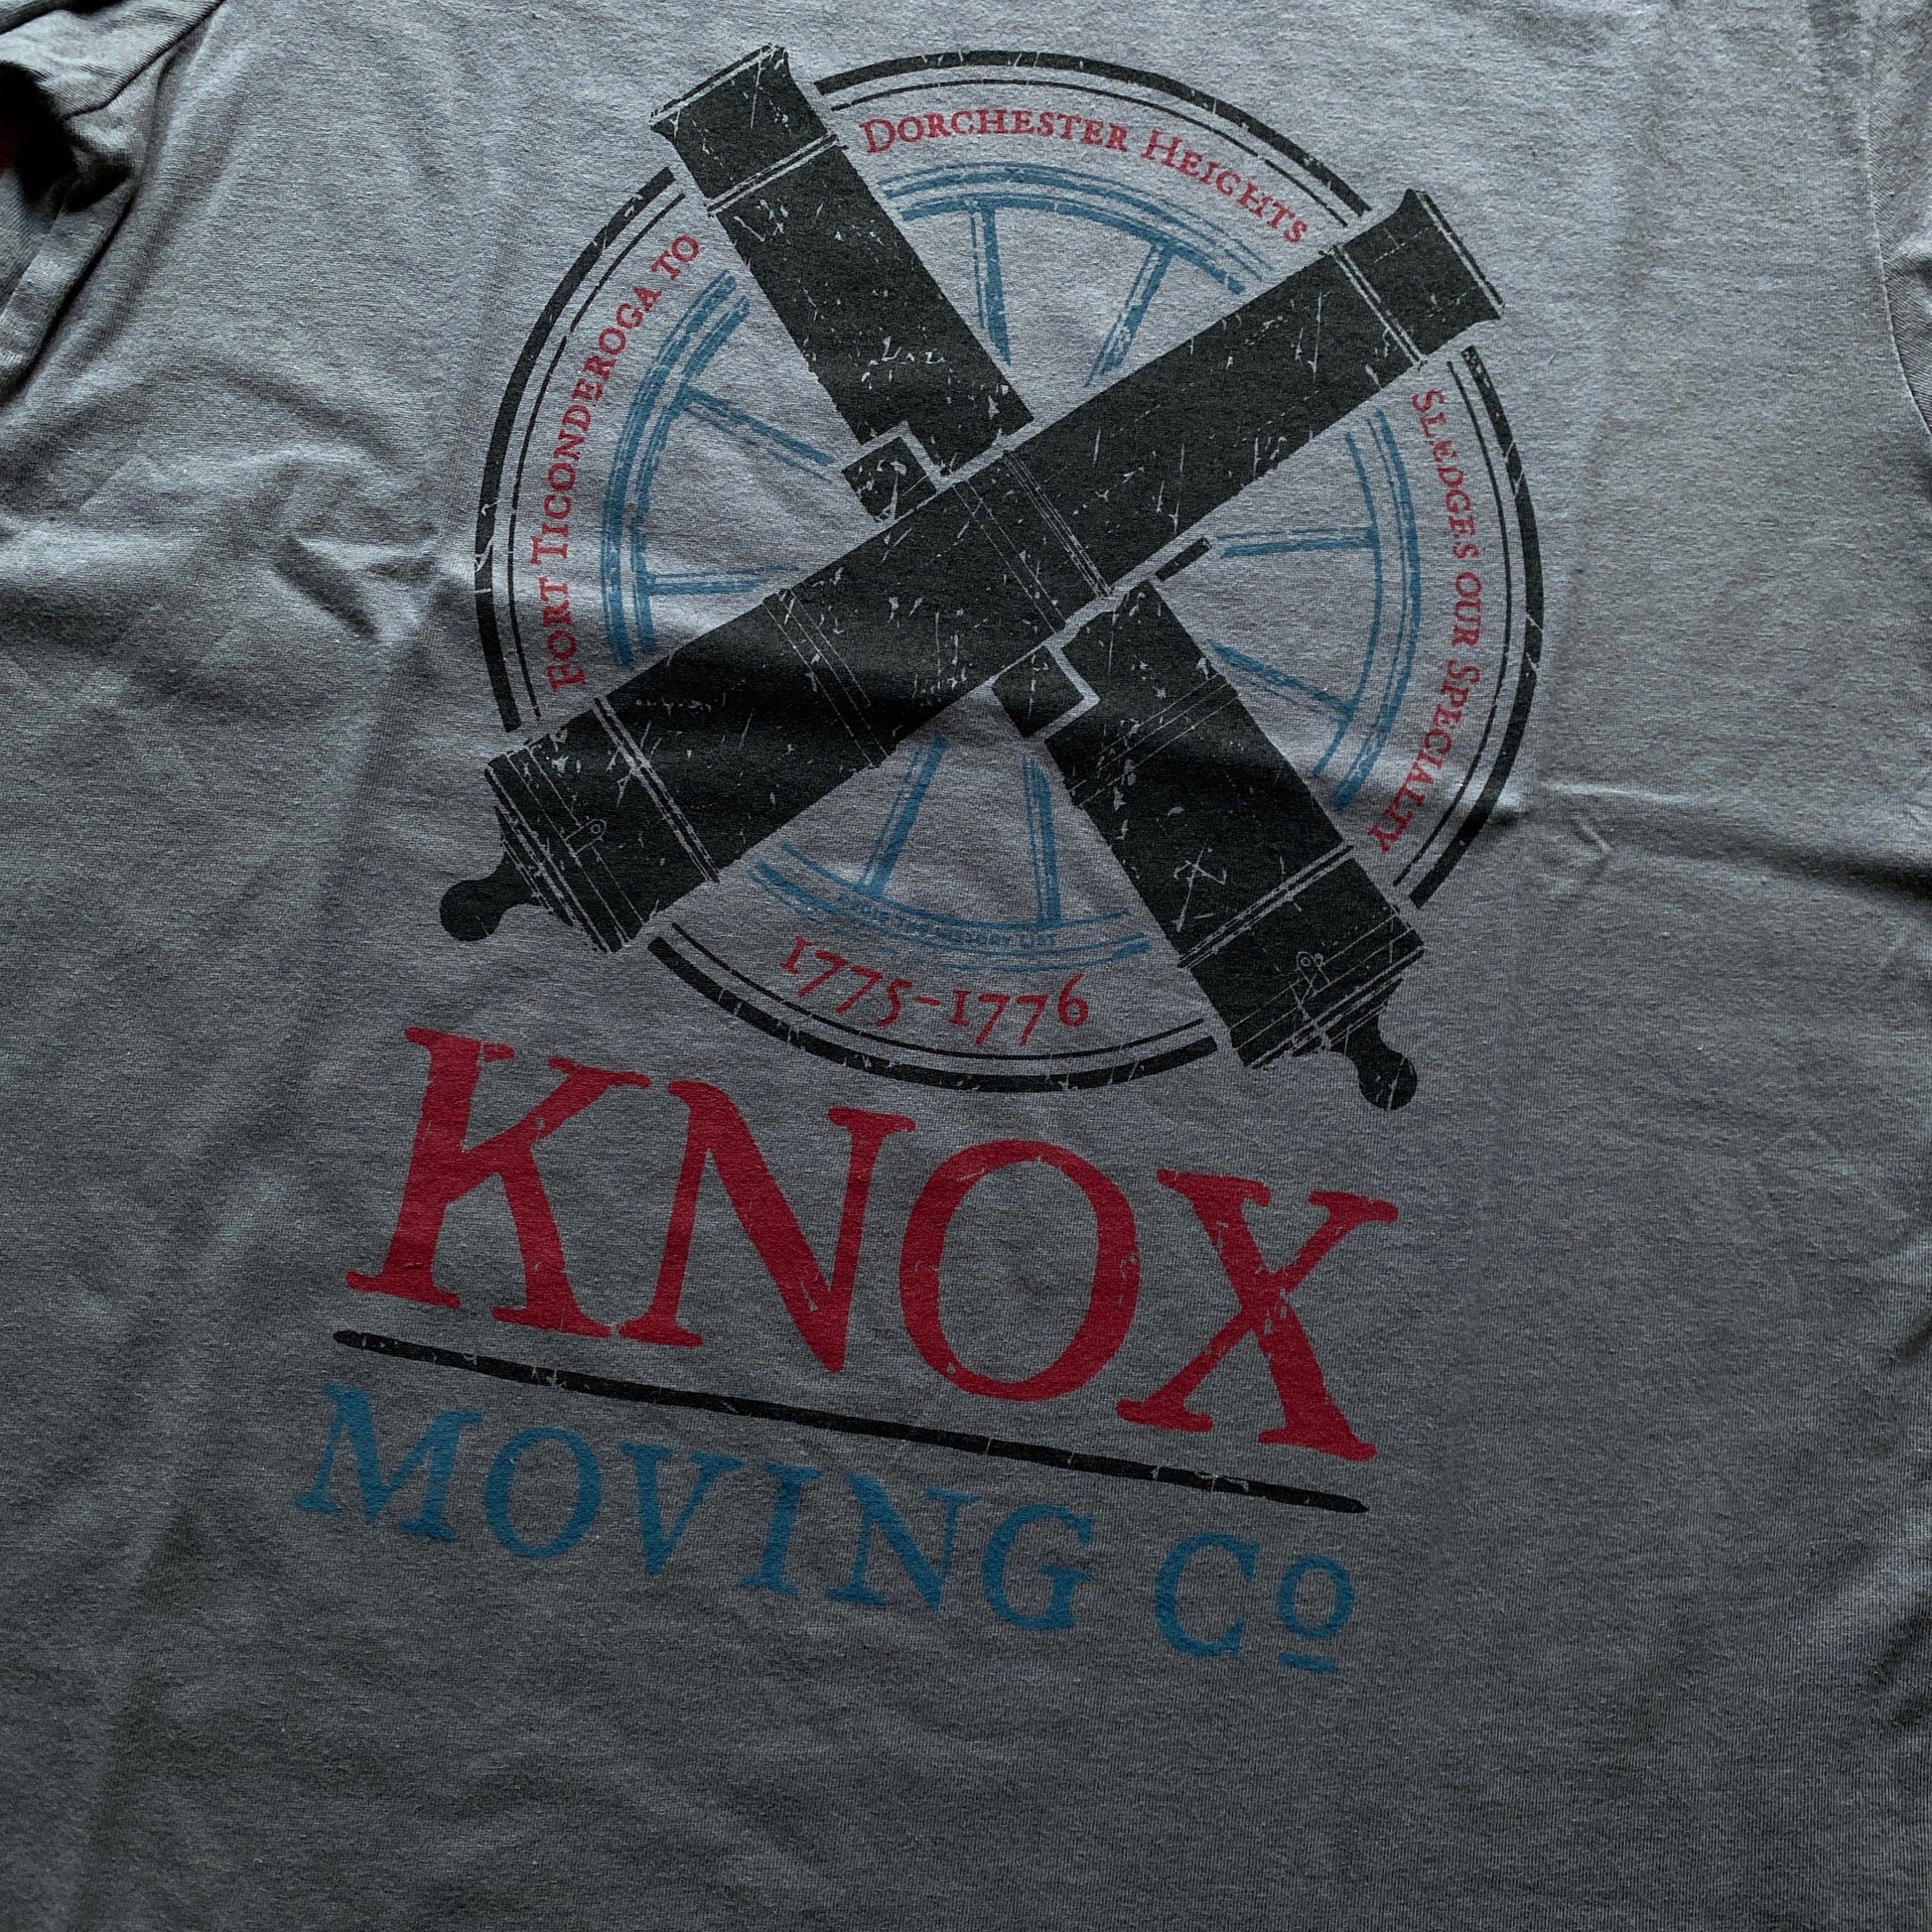 Close-up of "Knox Moving Co." Long-sleeved shirt from the history list store